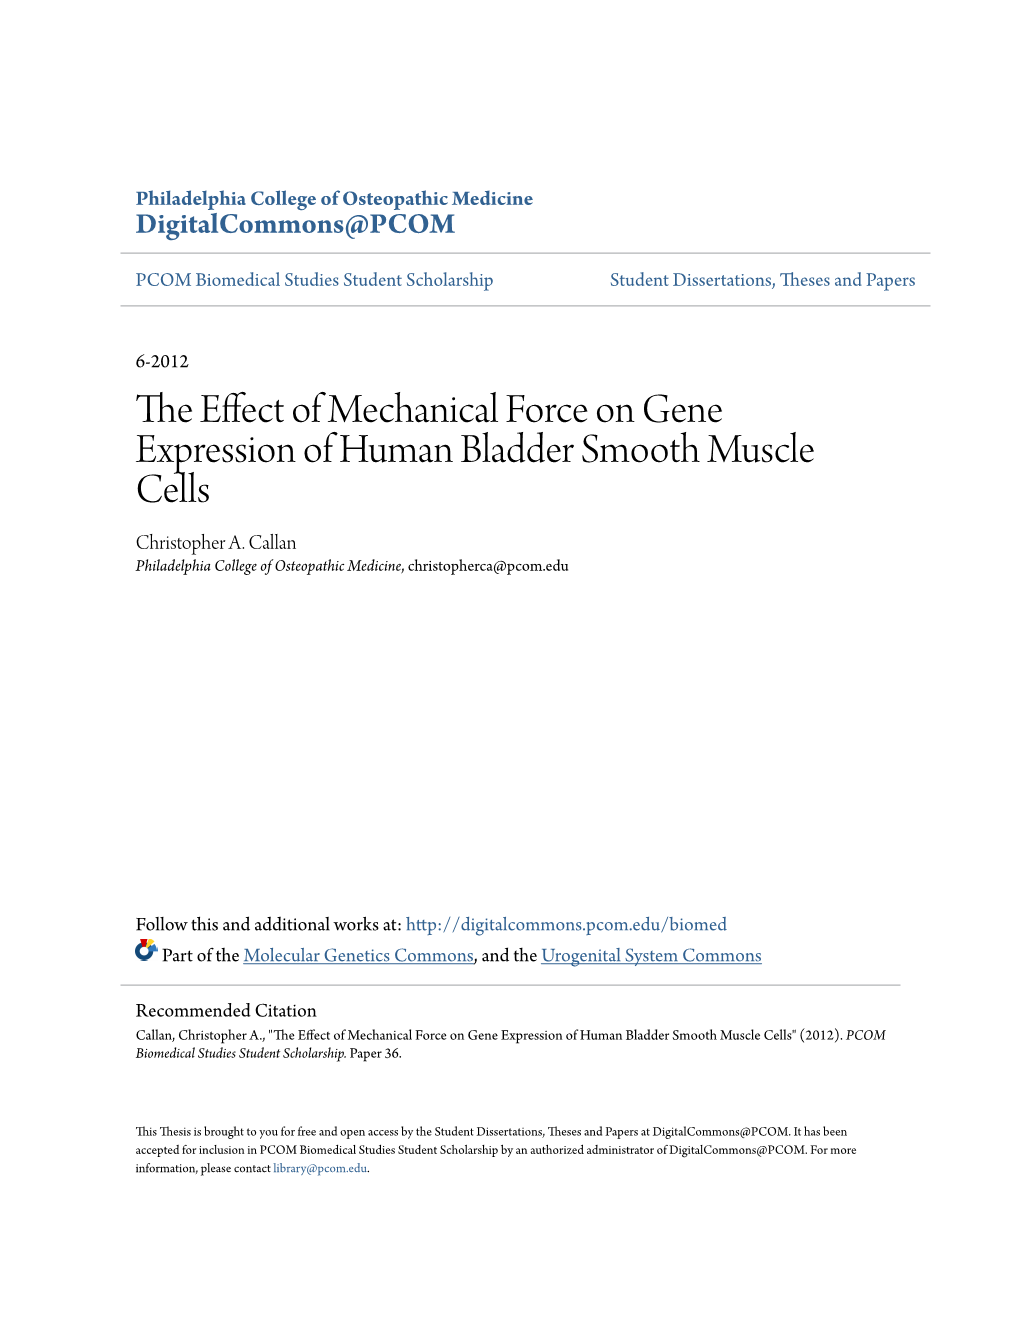 The Effect of Mechanical Force on Gene Expression of Human Bladder Smooth Muscle Cells" (2012)